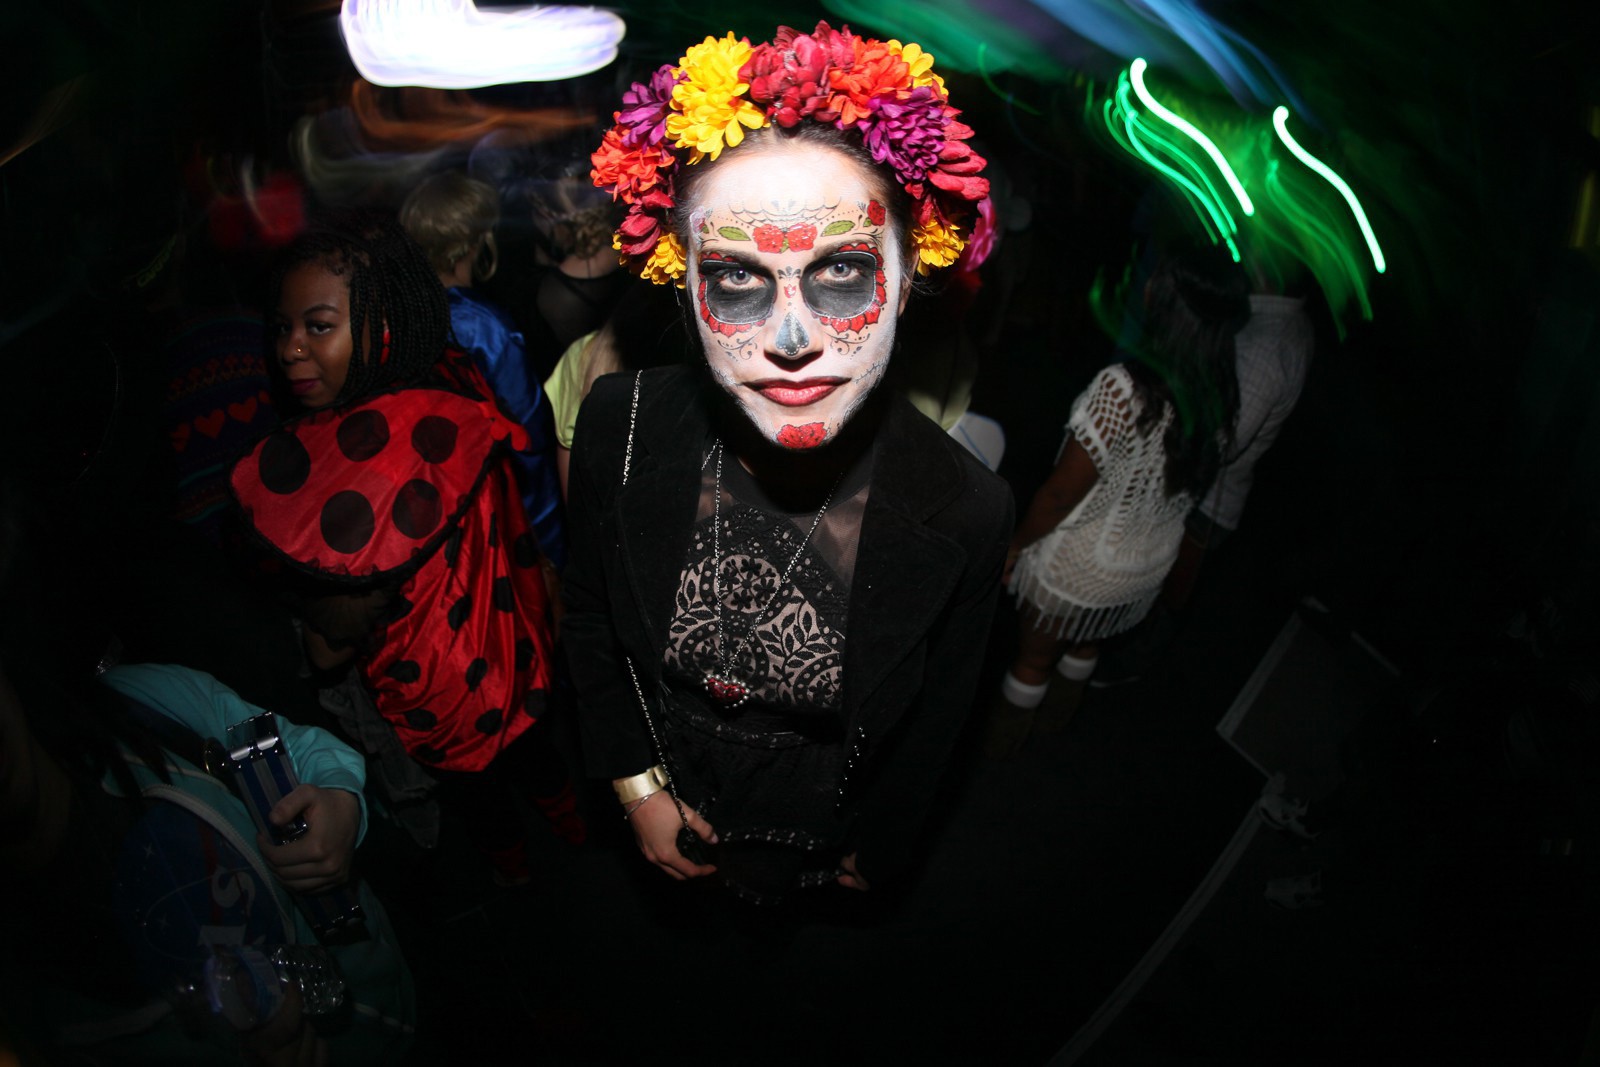 Rio de Janeiro, with its talent for parties, could not be left out of Halloween.